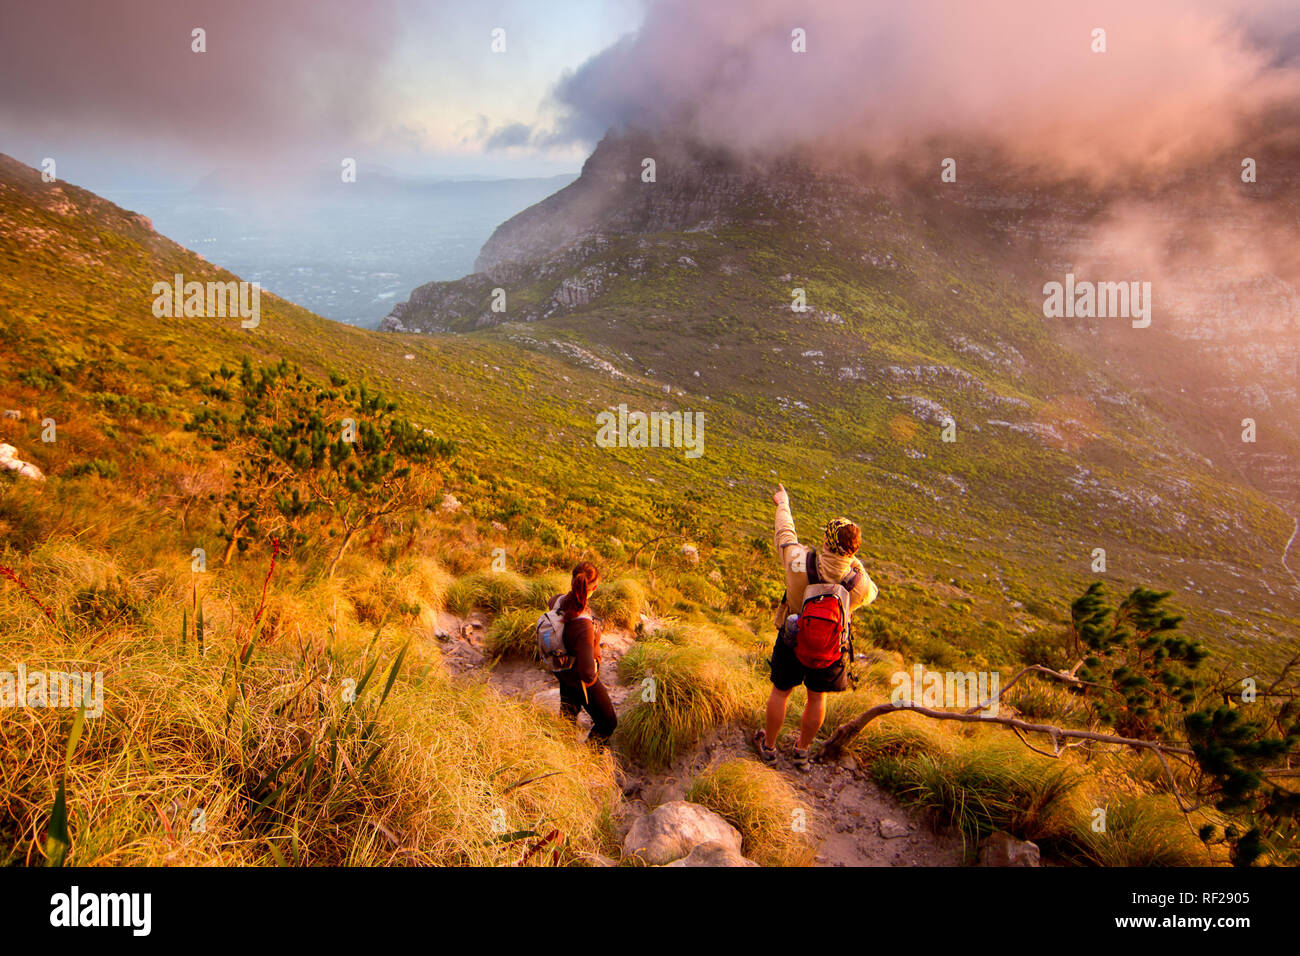 A sunset hike up Devil's Peak afords incredible views as the sun dips below the Atlantic Ocean horizon, Cape Town, Western Cape Province, South Africa Stock Photo